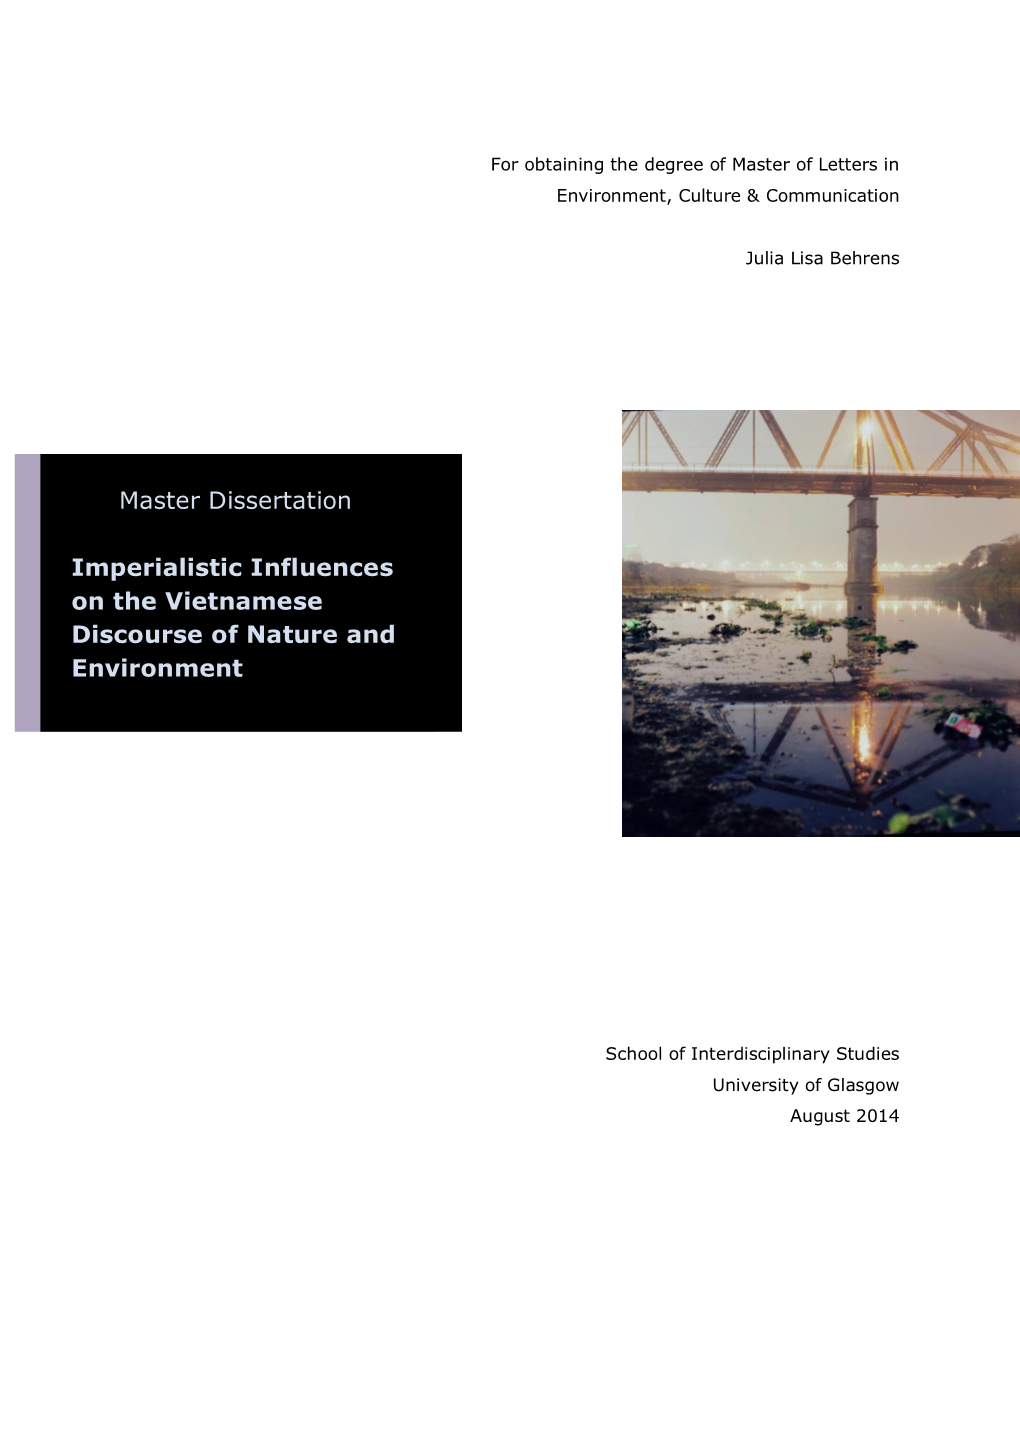 Master Dissertation Imperialistic Influences on the Vietnamese